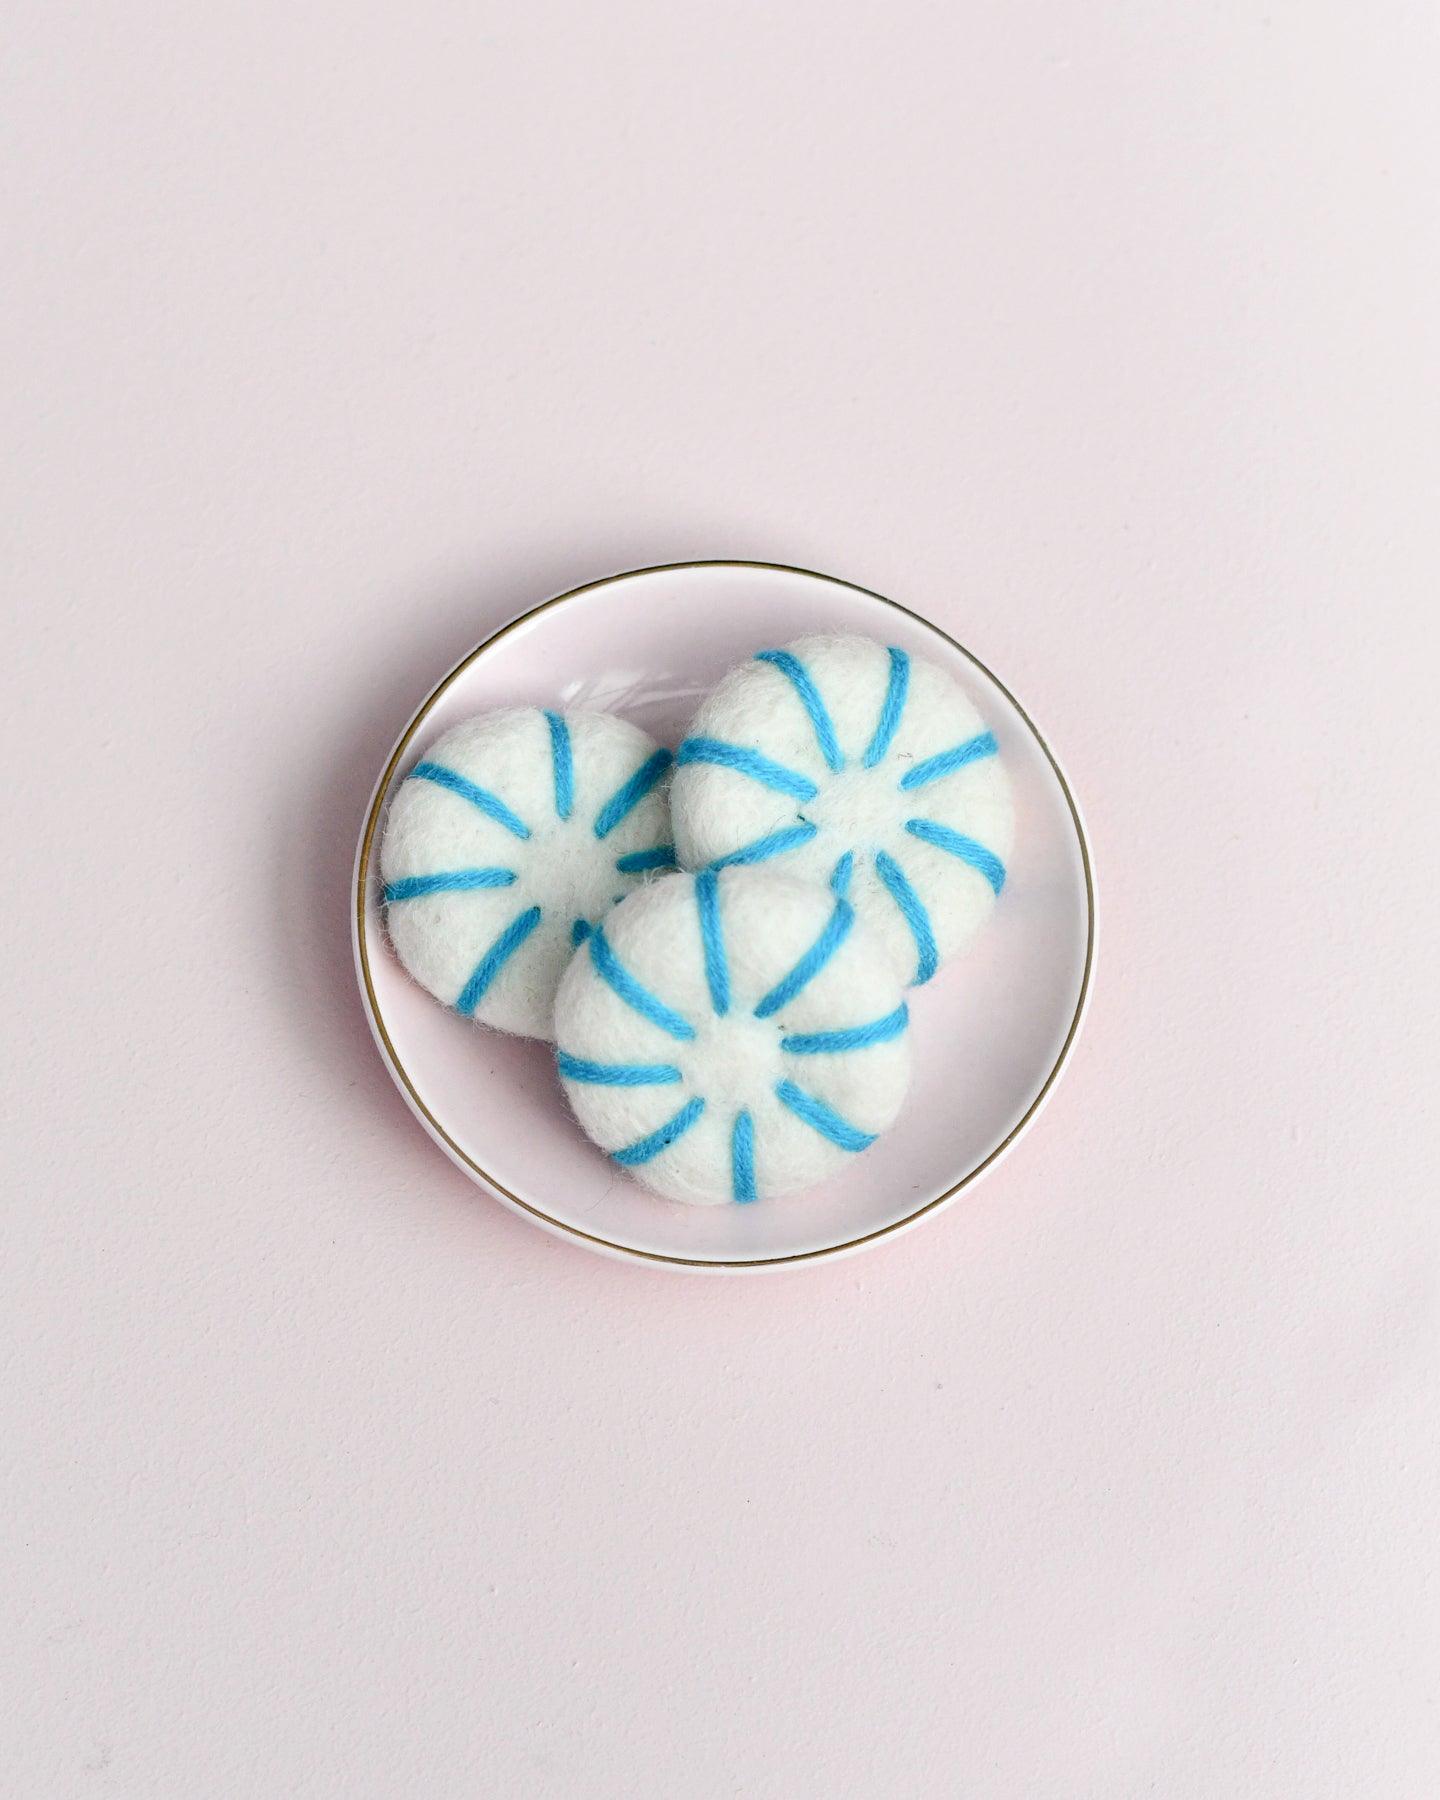 Felt Peppermint Candy Lollies (Mint Blue and White) - Set of 3 - Tara Treasures